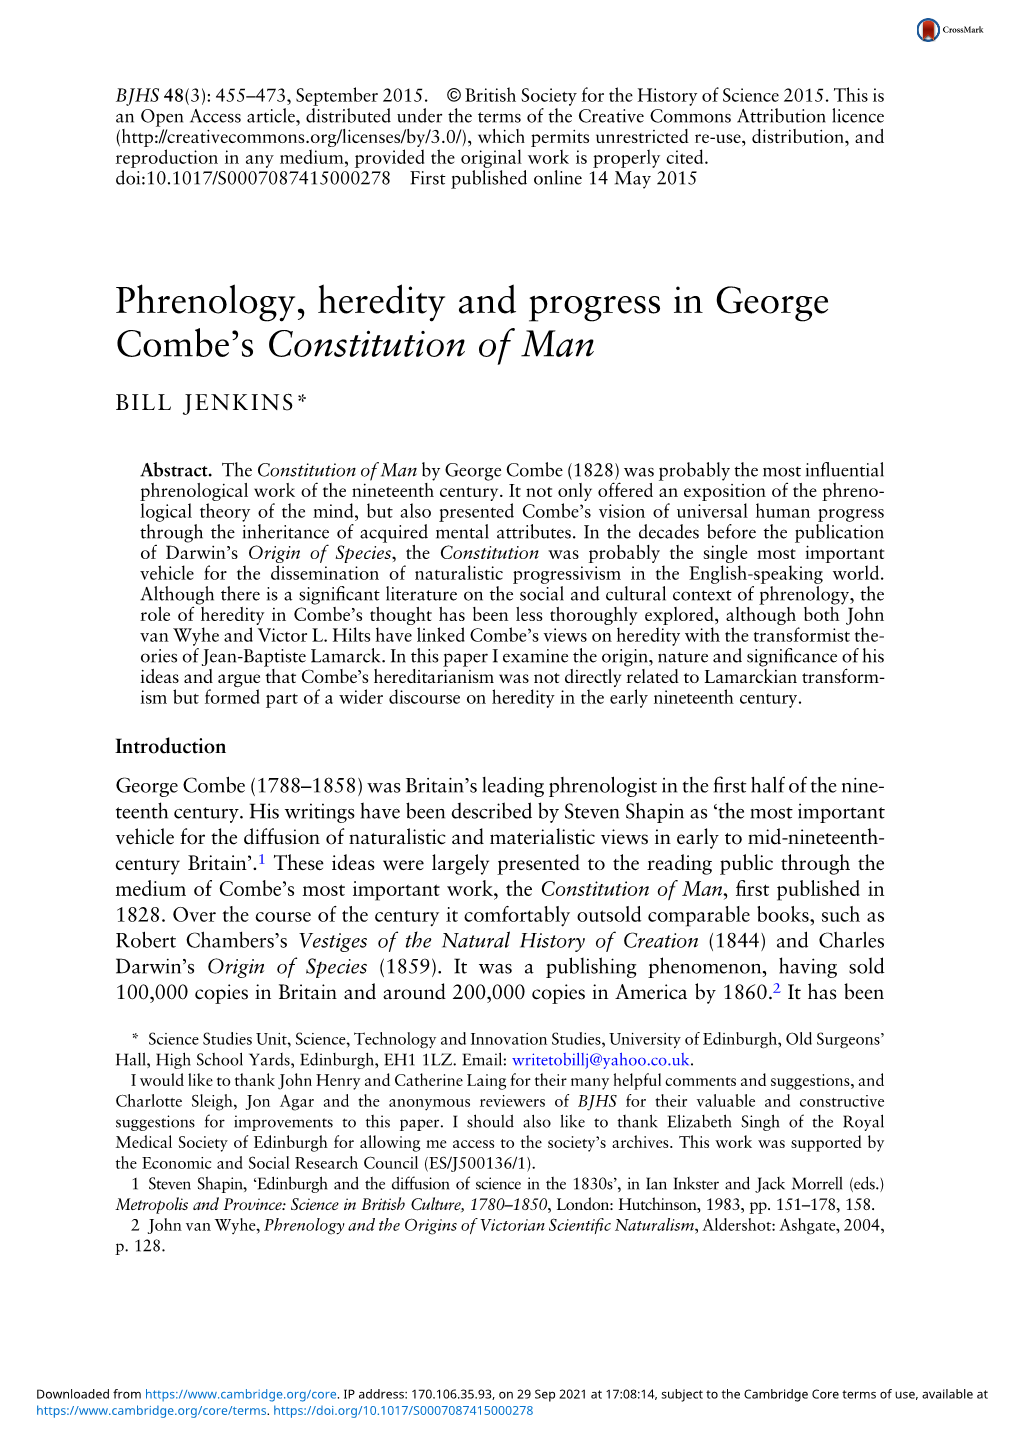 Phrenology, Heredity and Progress in George Combe's Constitution Of